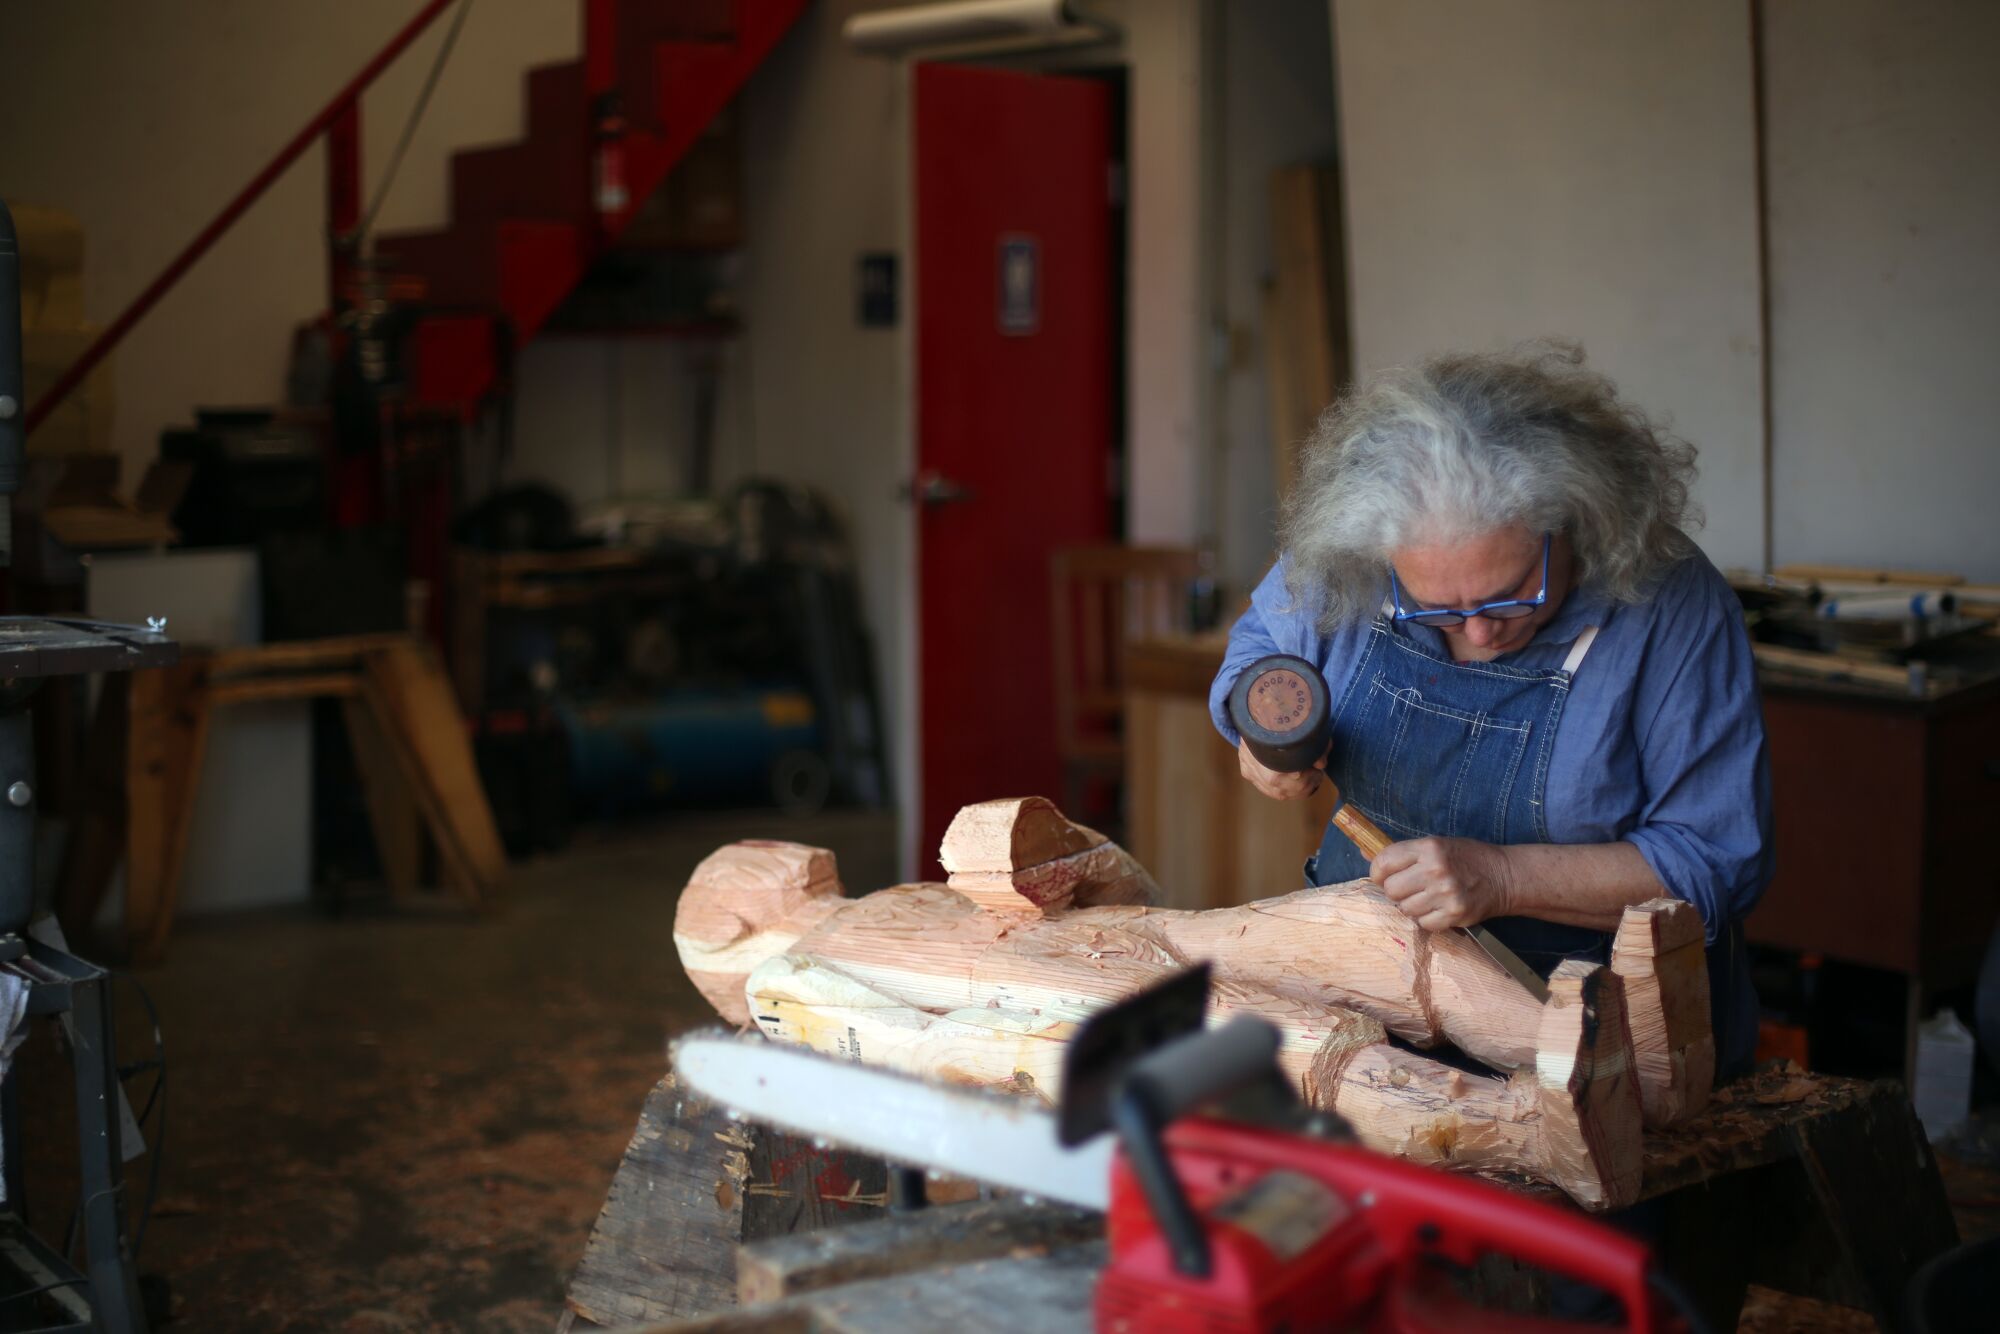 Alison Saar, in overalls, chisels at a wooden sculpture in a warehouse studio